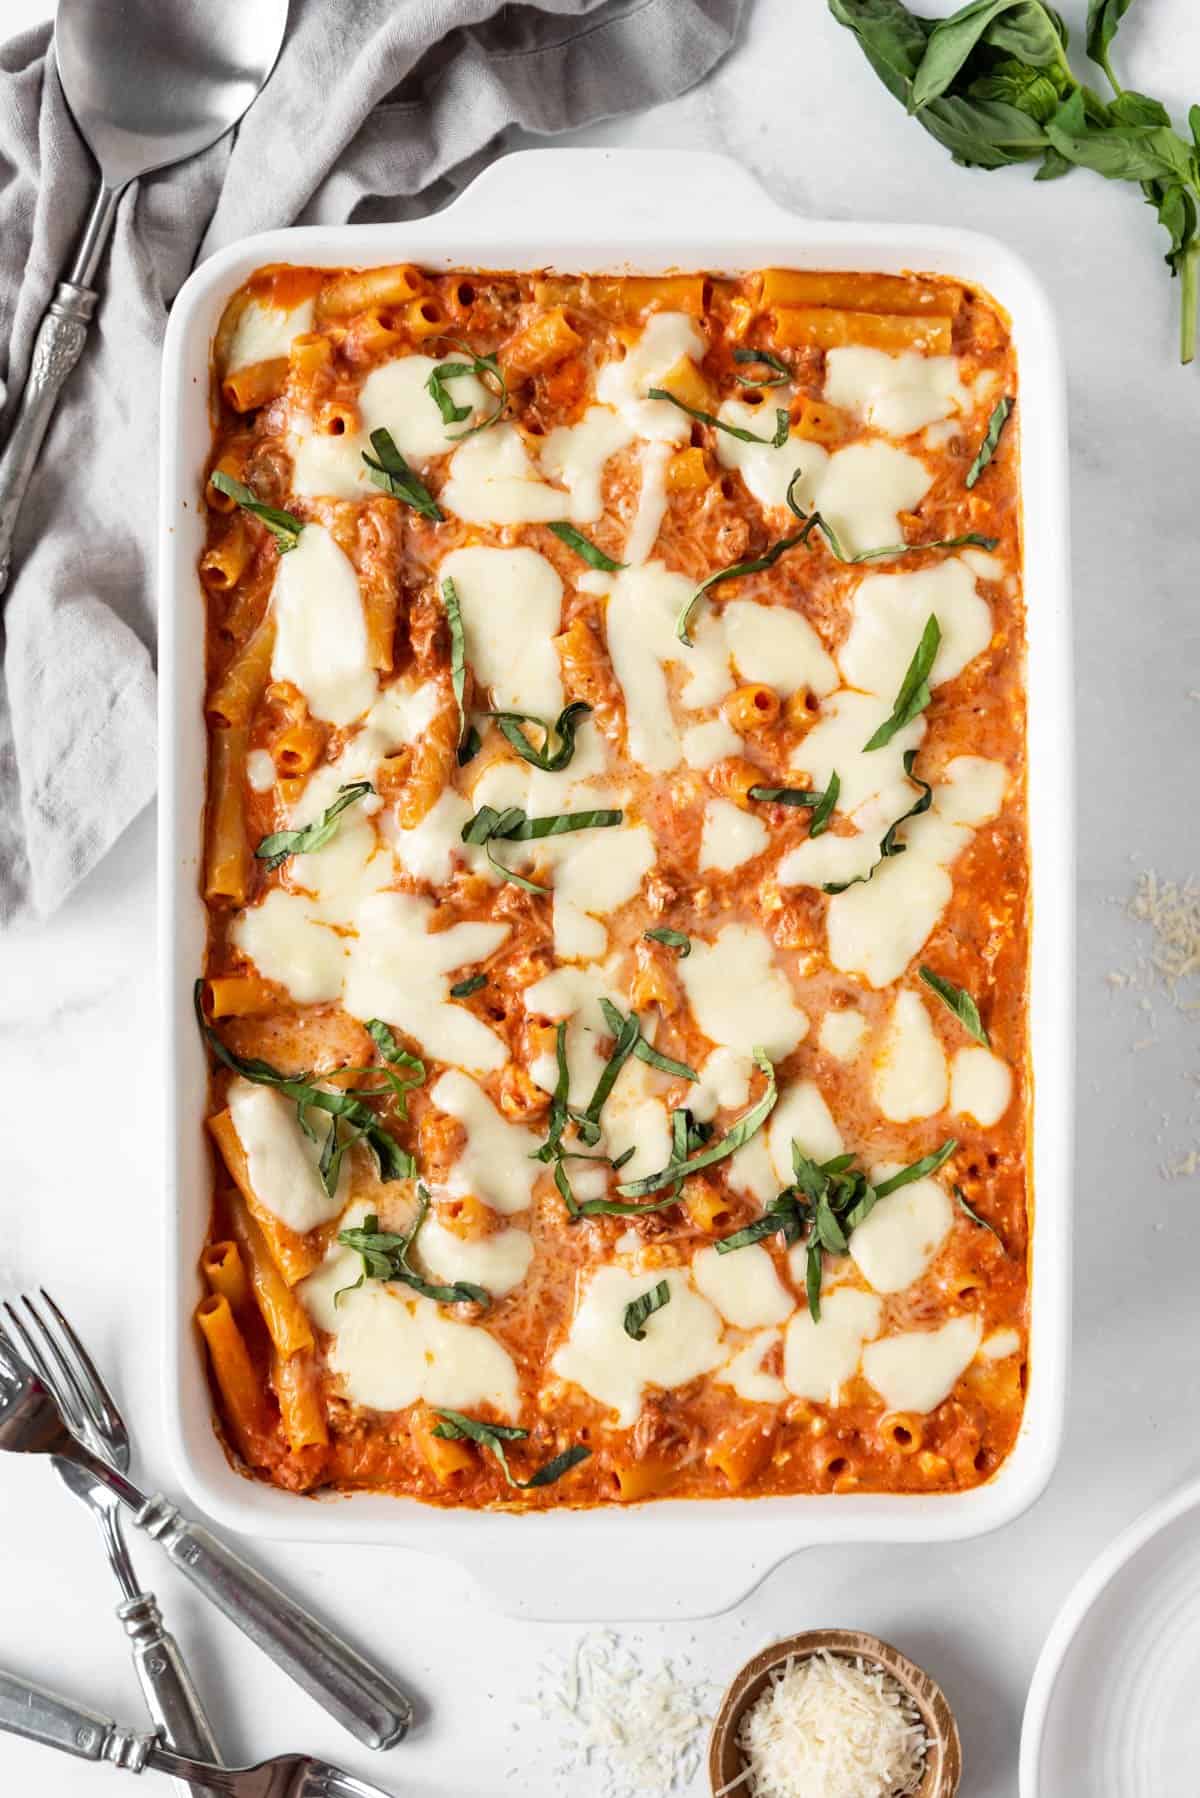 A large casserole dish of baked ziti with melted mozzarella cheese on top.